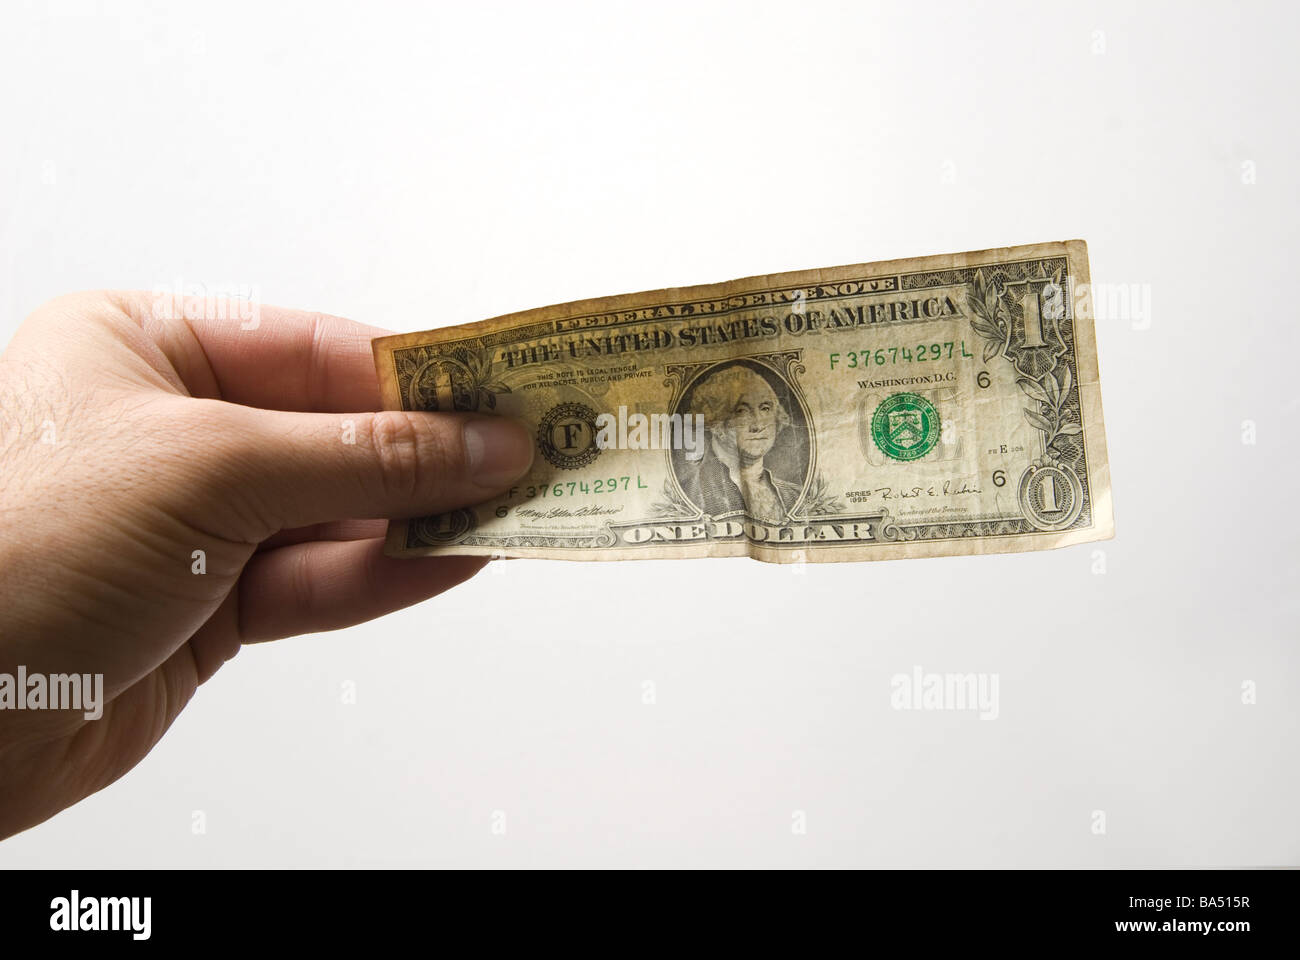 Hand holding one dollar banknote against a white background Stock Photo